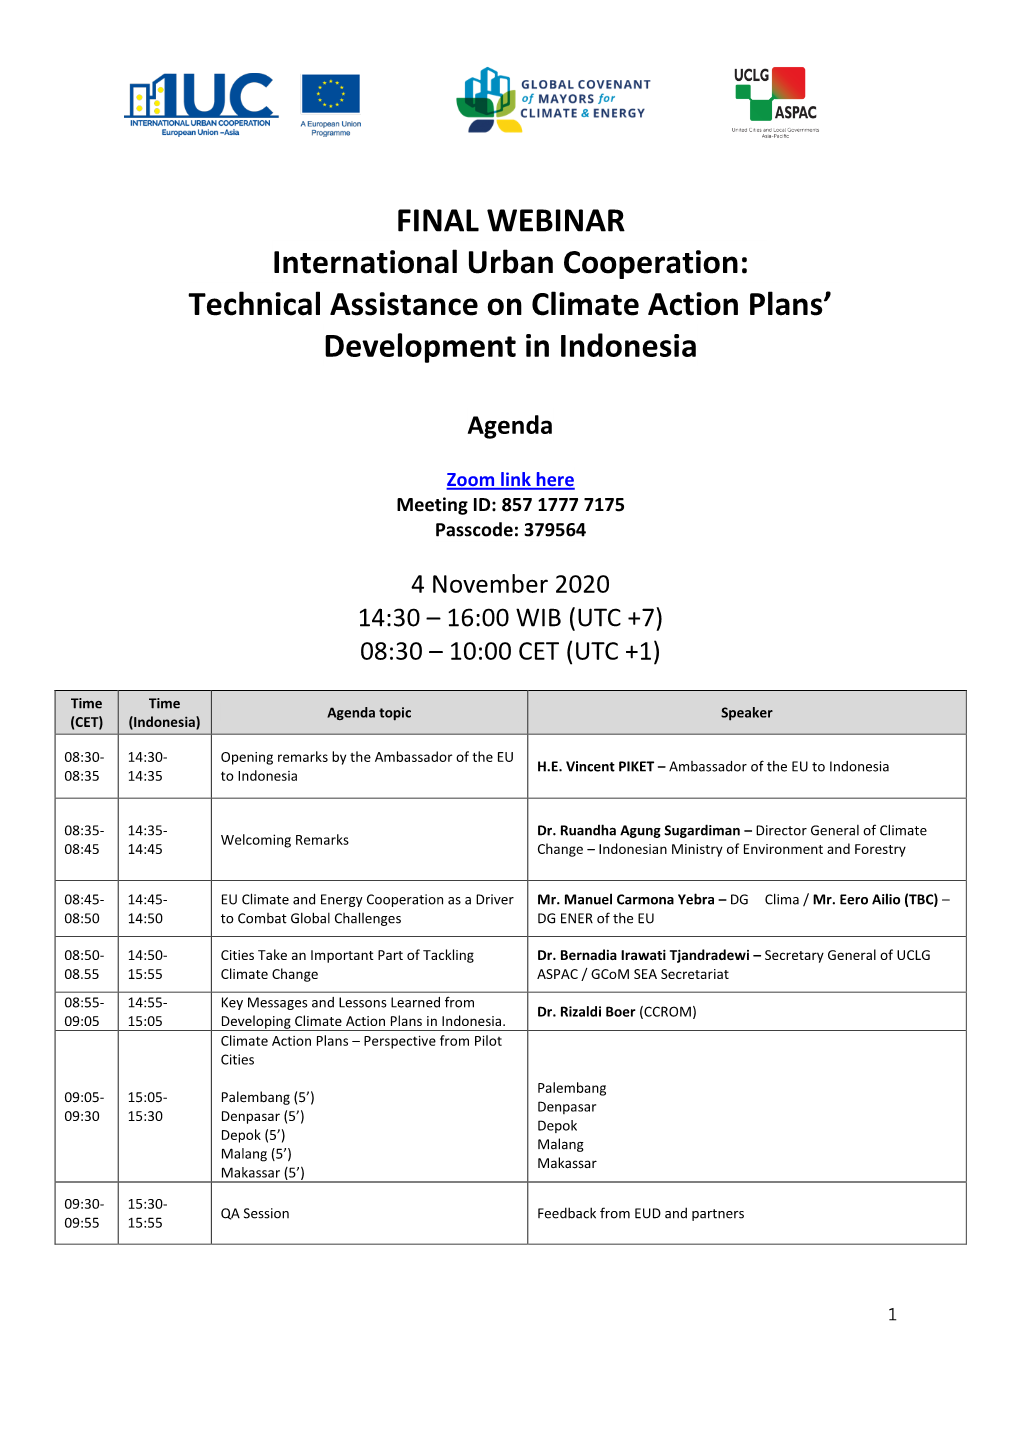 FINAL WEBINAR International Urban Cooperation: Technical Assistance on Climate Action Plans' Development in Indonesia